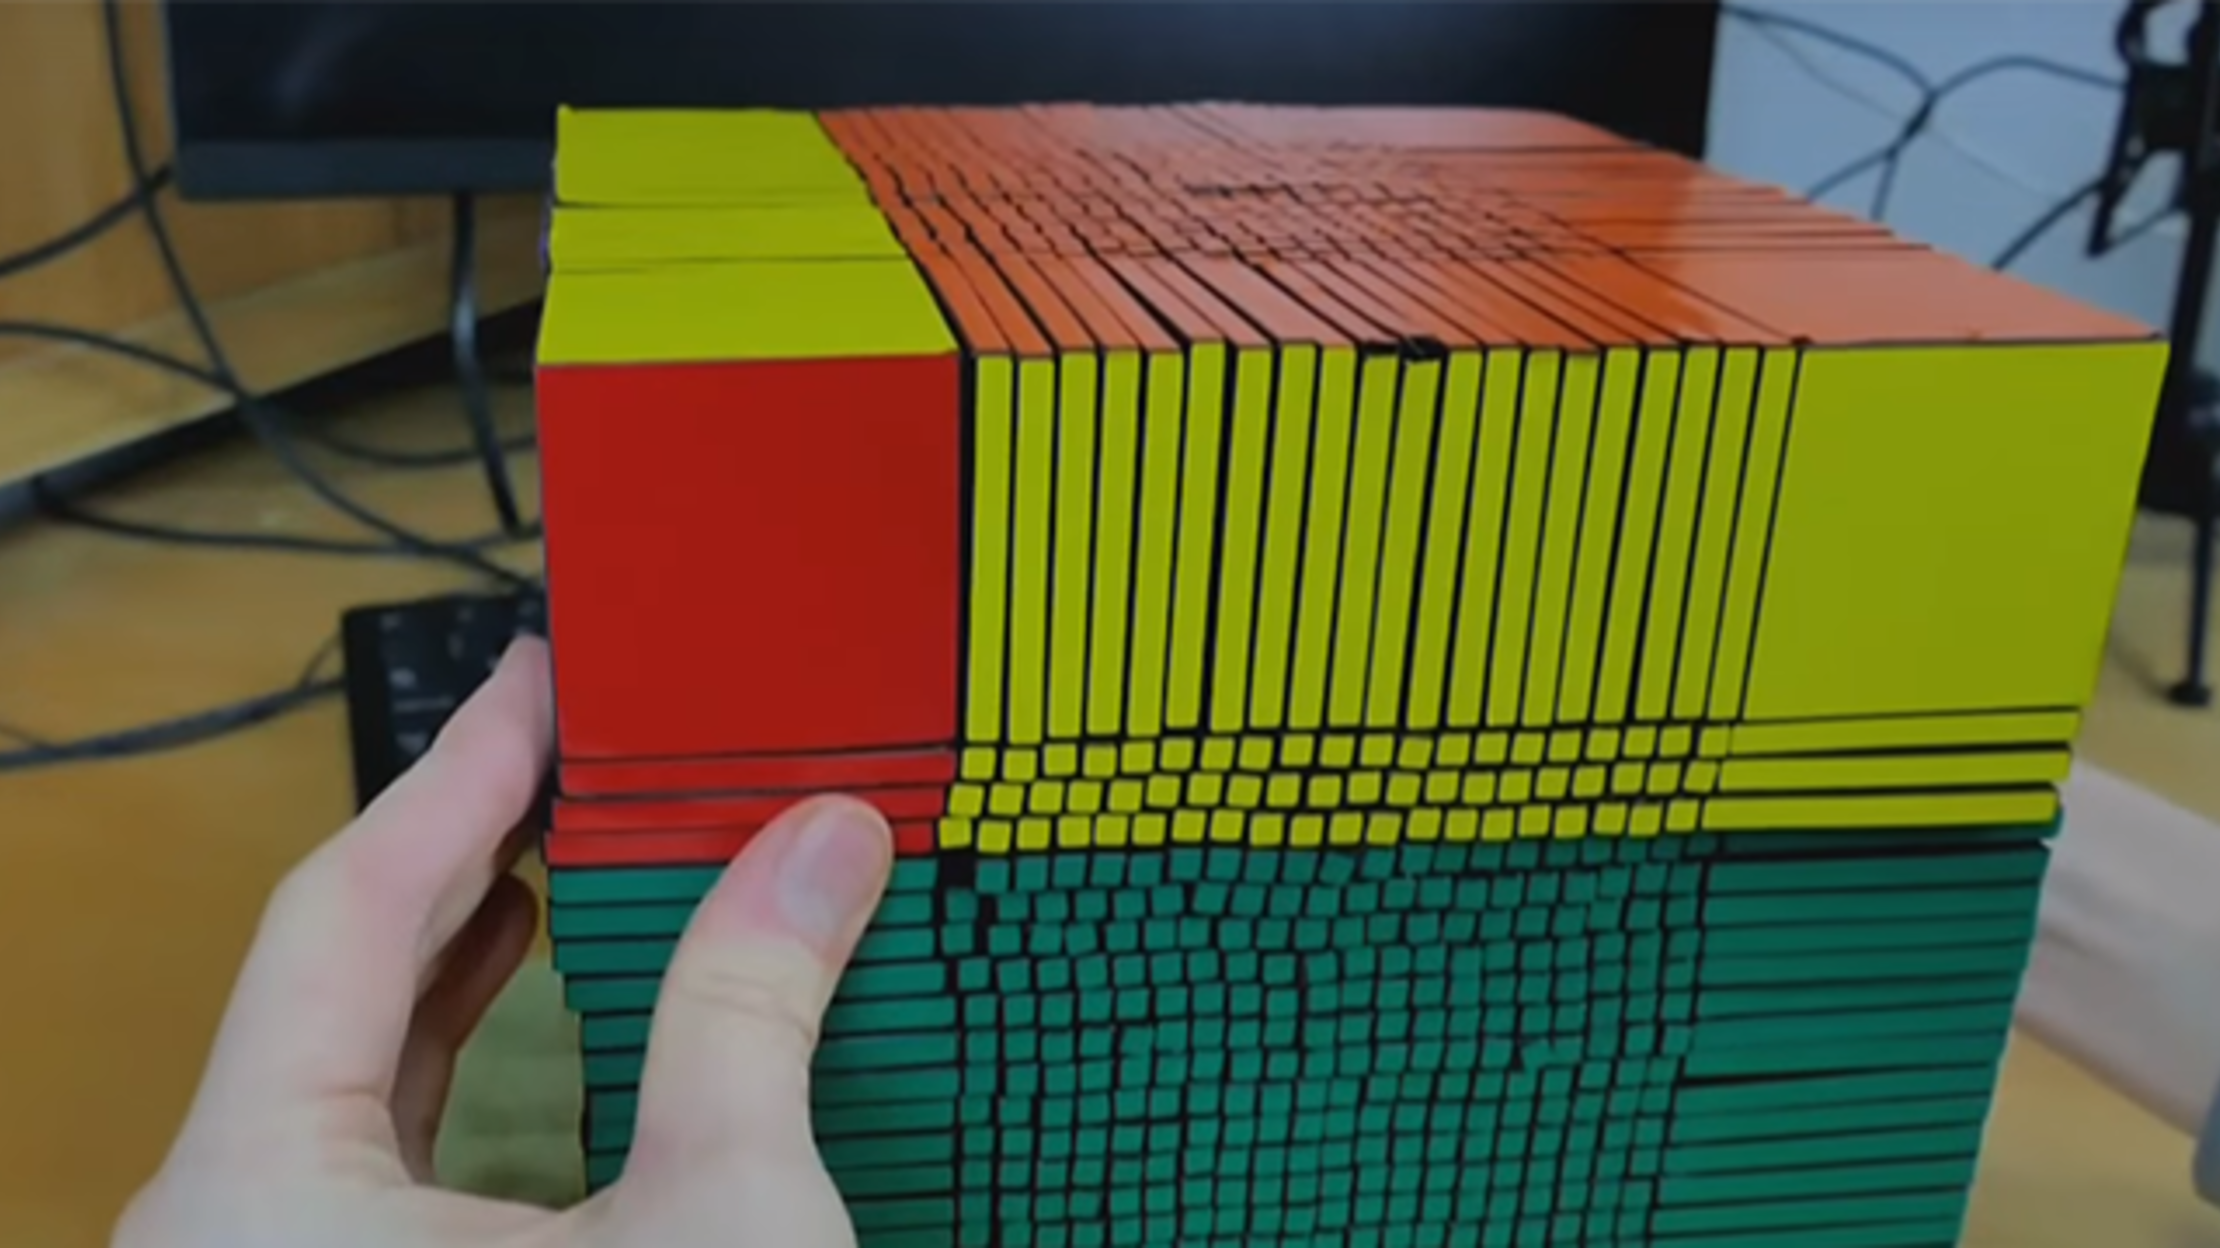 The World S Largest Rubik S Cube Has More Than 2900 Squares Mental Floss - the bigest rubix cube